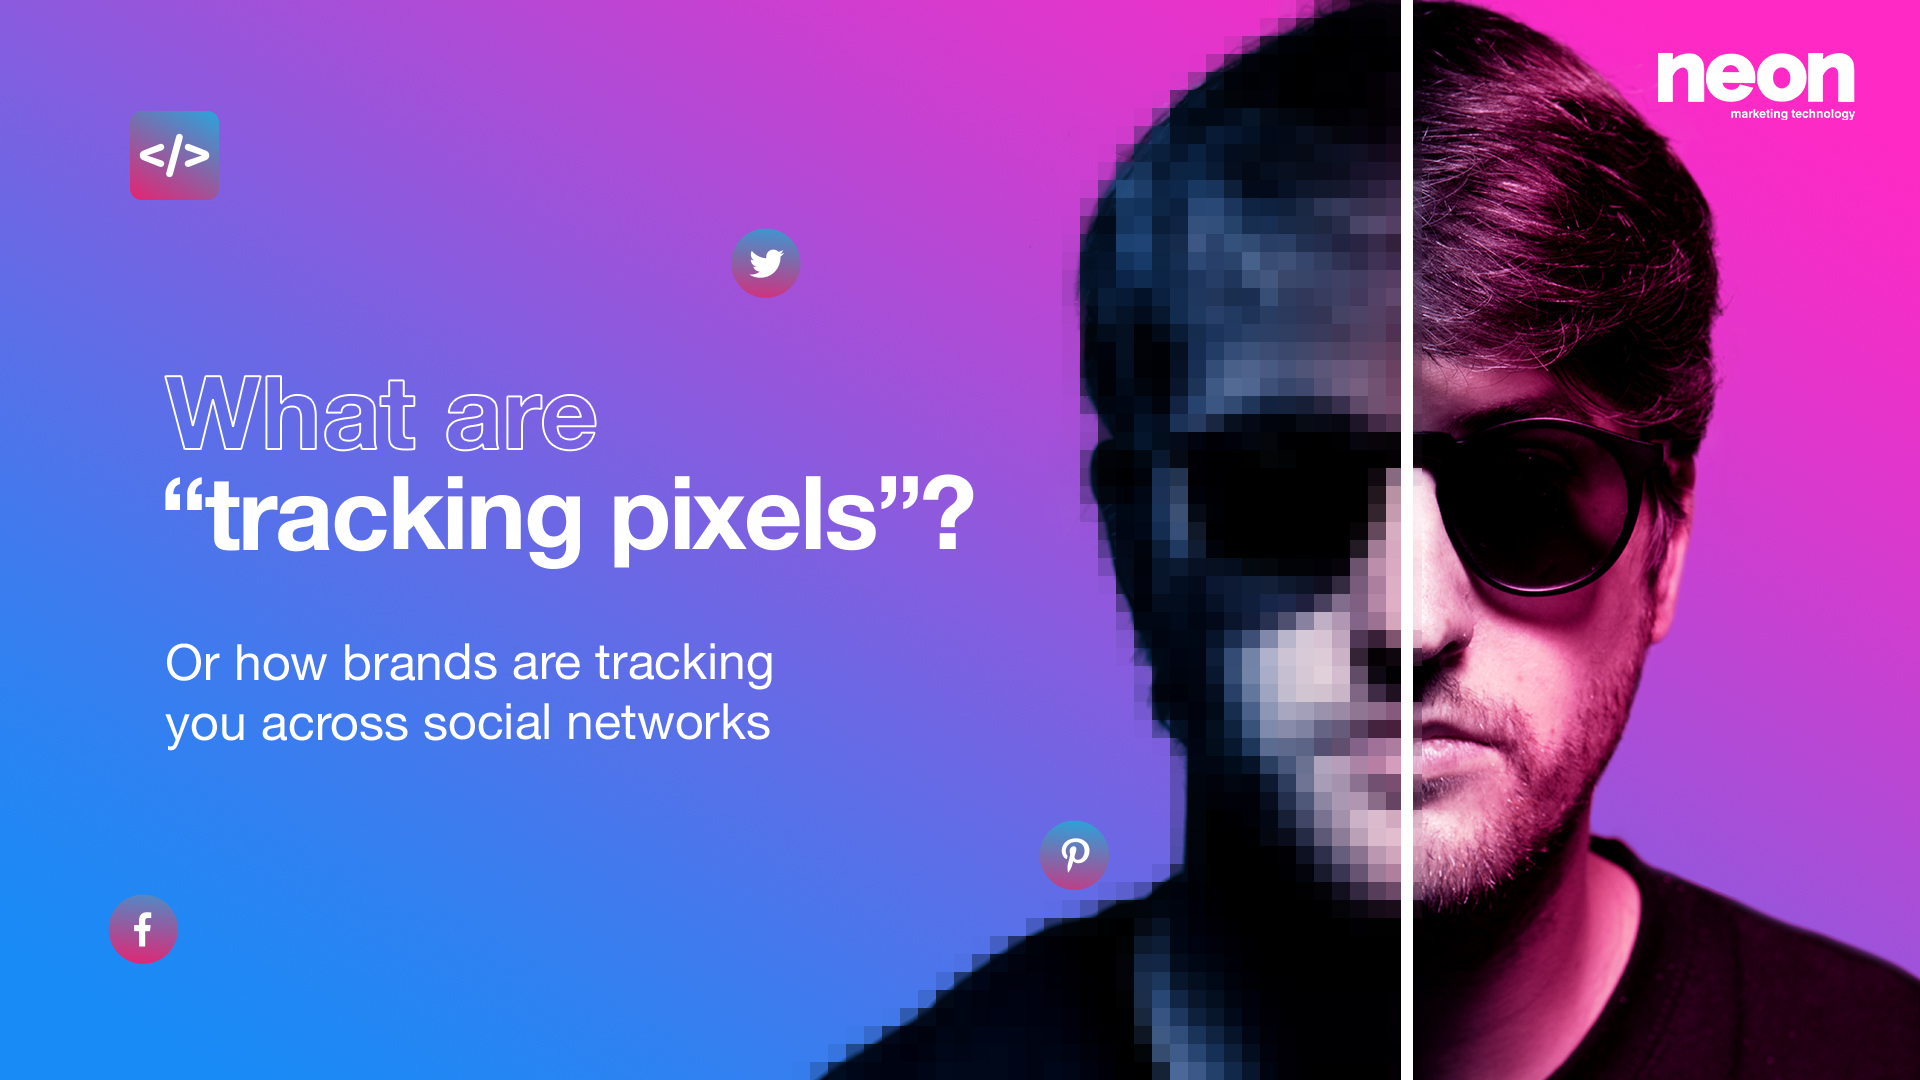 Why Track Clients With Hidden Pixel?